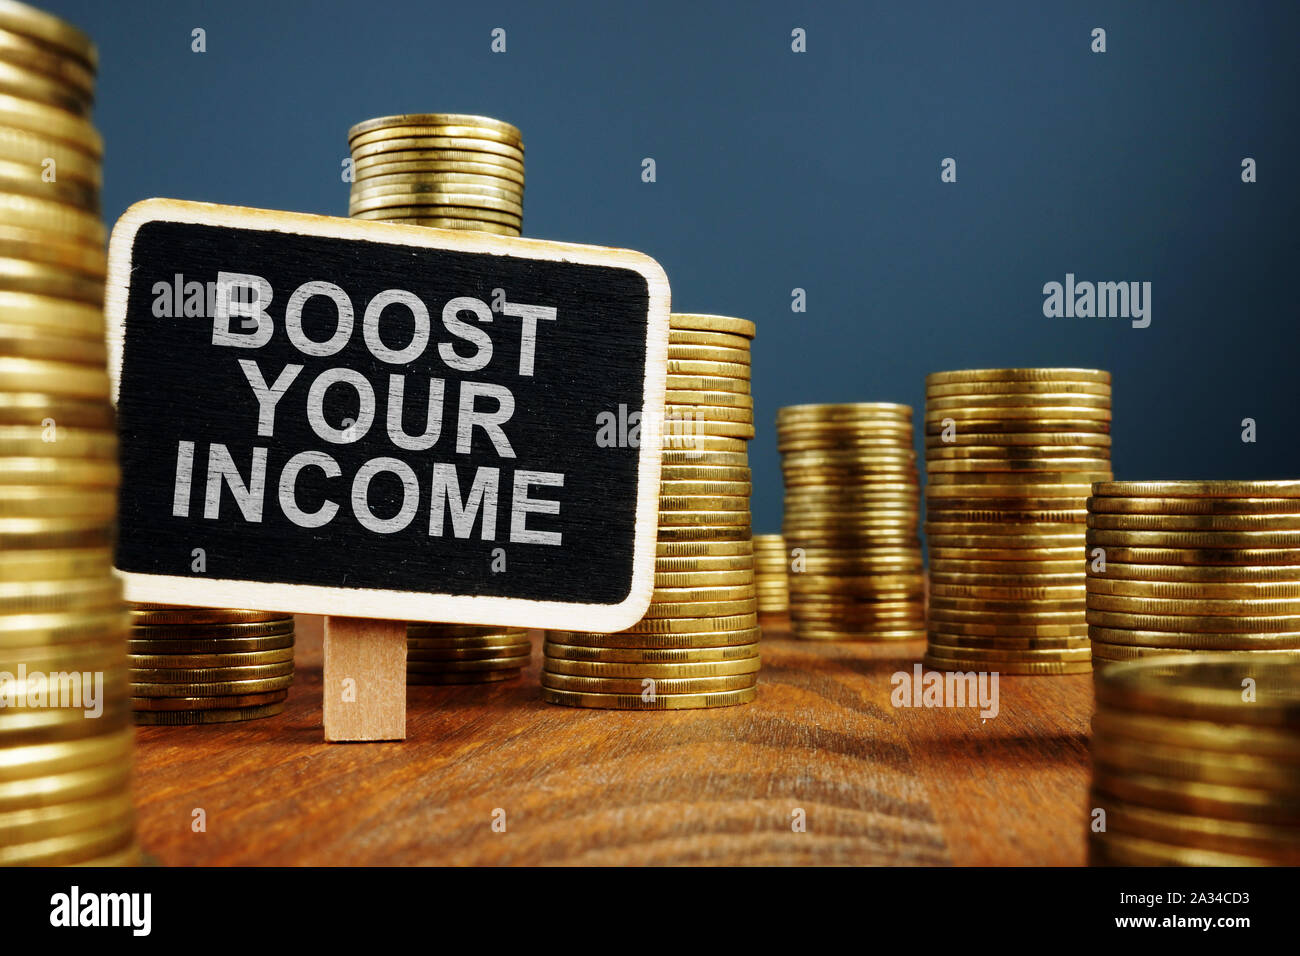 Boost Your Income concept. Stacks of coins and wooden plate. Stock Photo